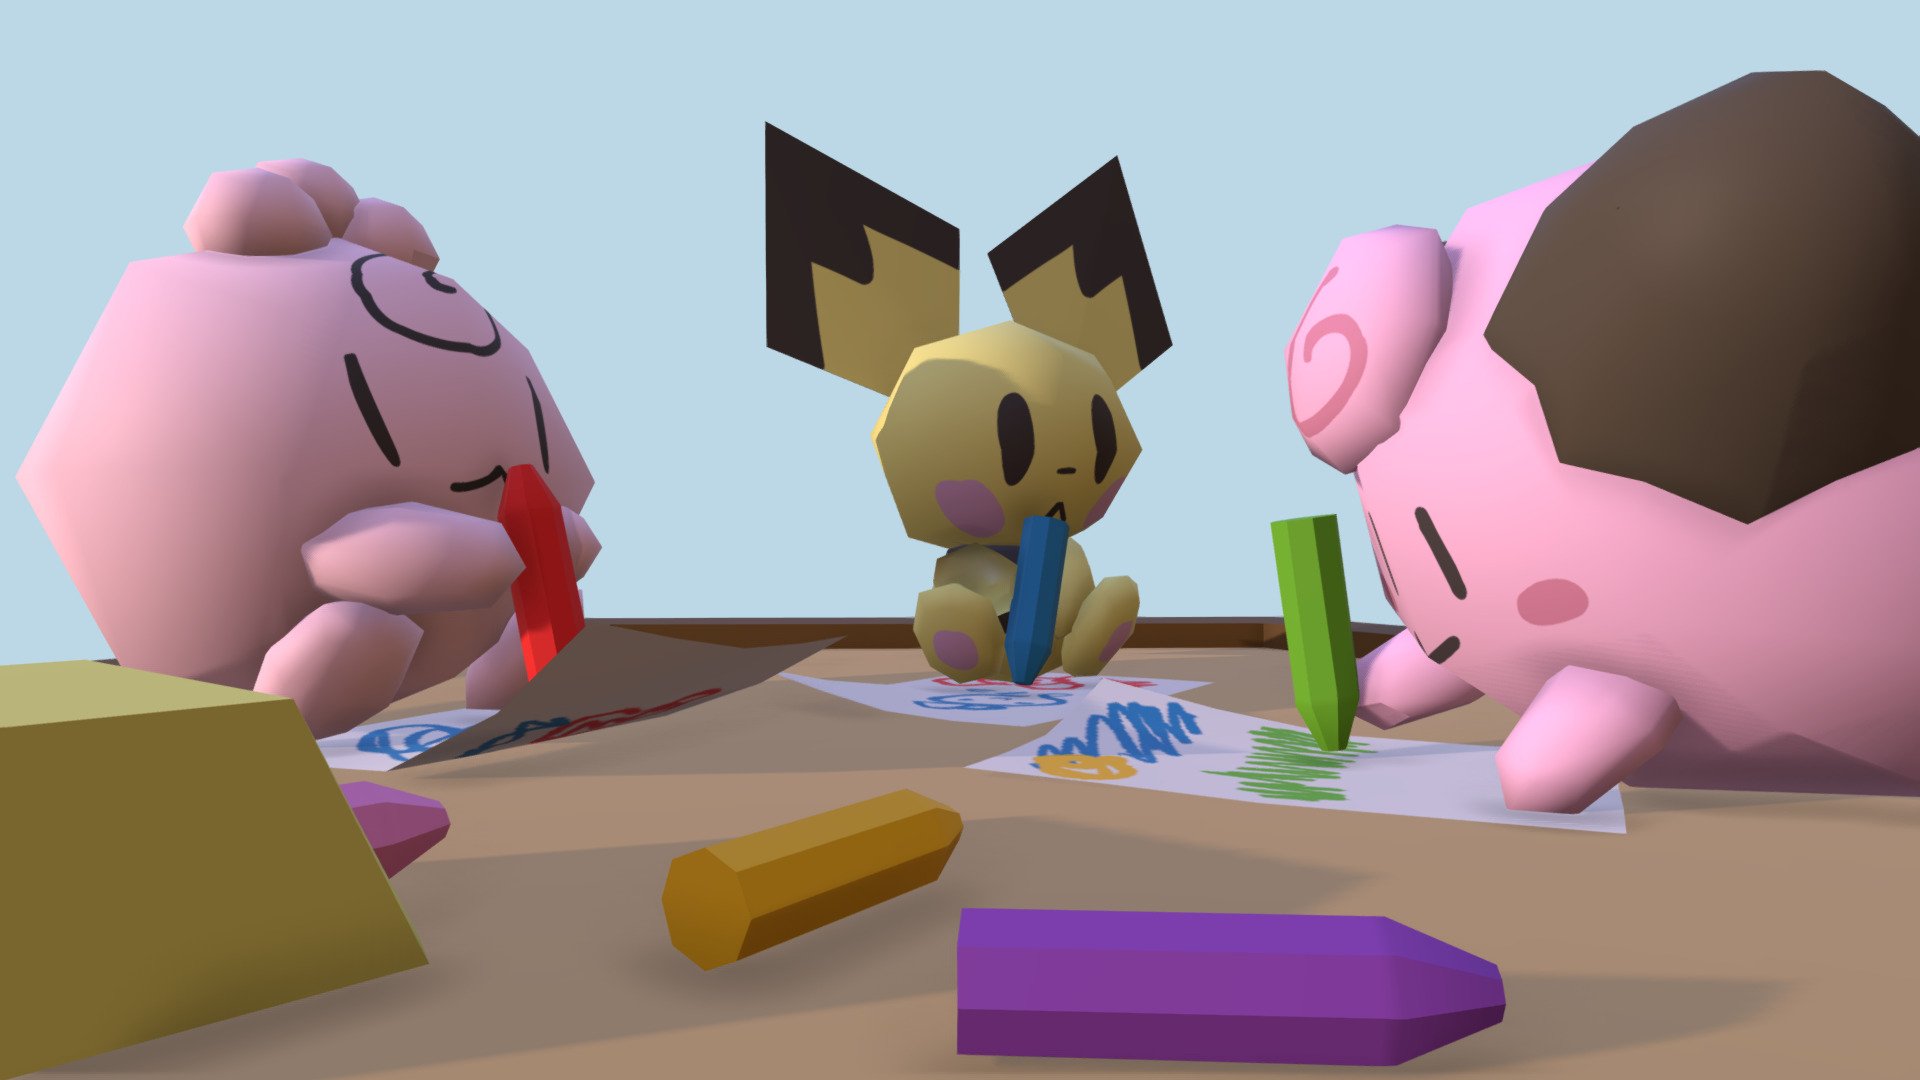 Some baby Pokemon spending their time at day care coloring 3d model